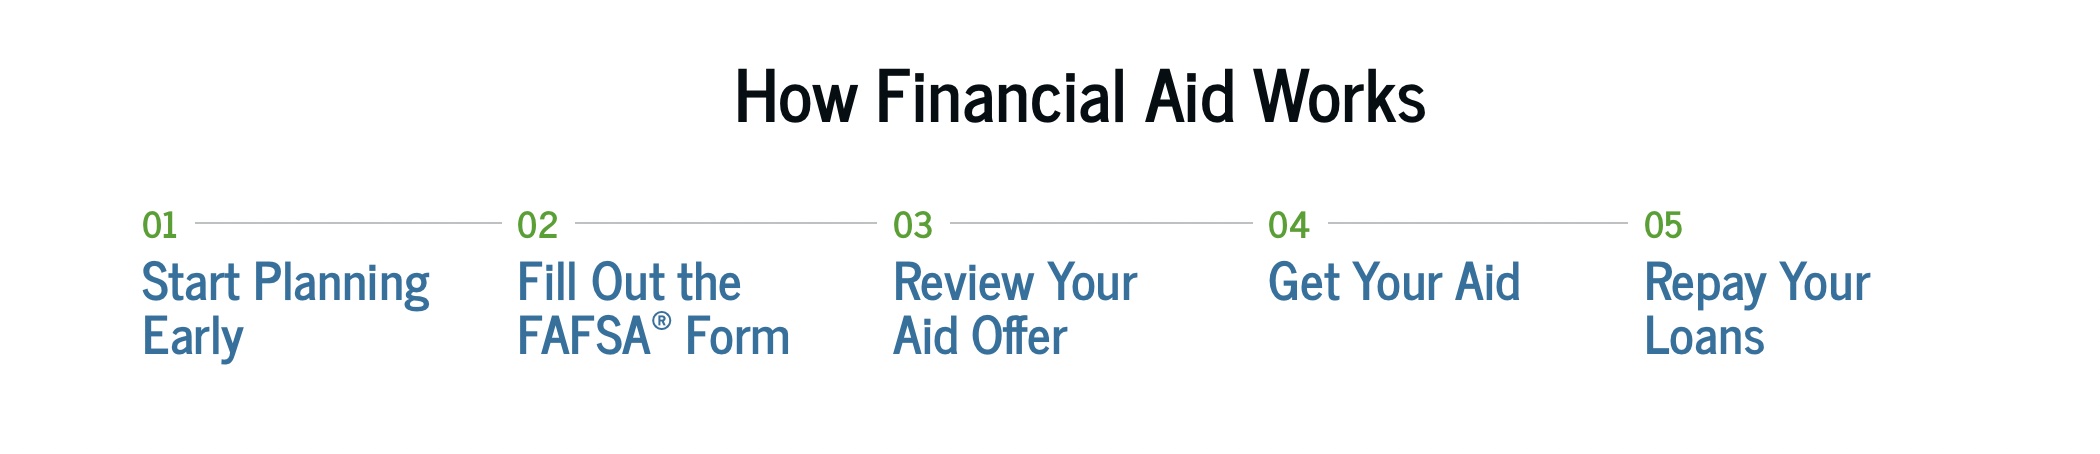 Financial Aid: How It Works